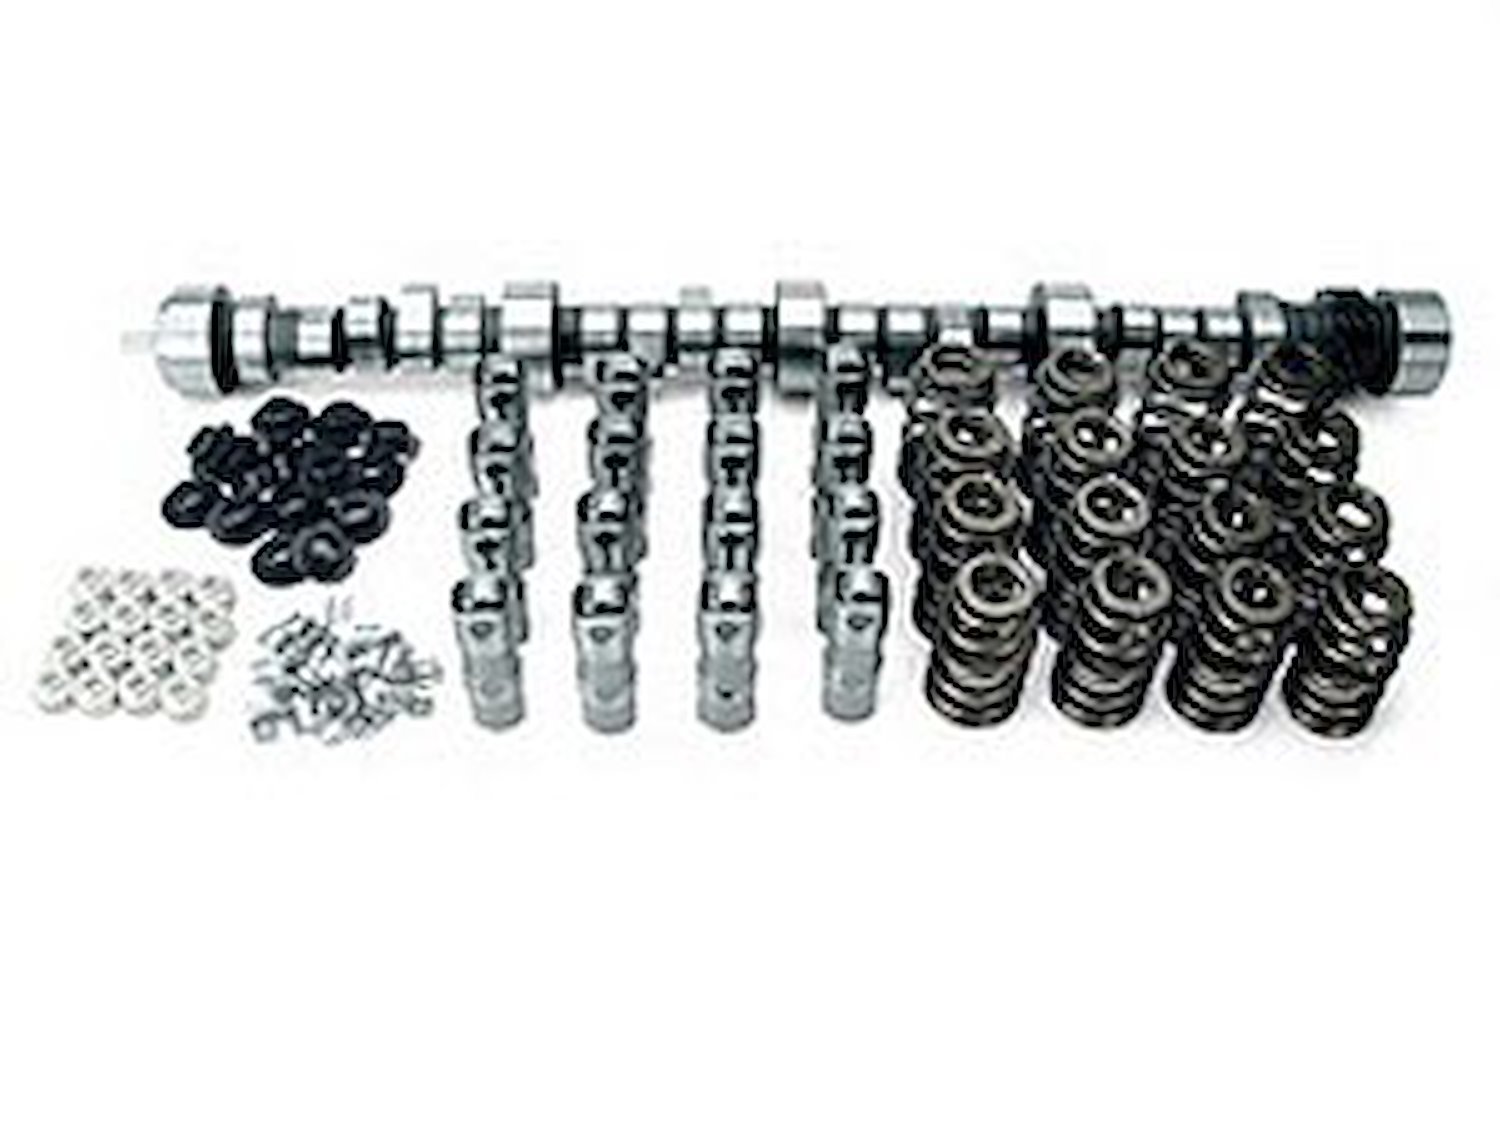 XFI Hydraulic Roller Camshaft Complete Kit GM LT1 & LT4 350ci 1995-97 Lift: .576"/.570" With 1.6 Rockers